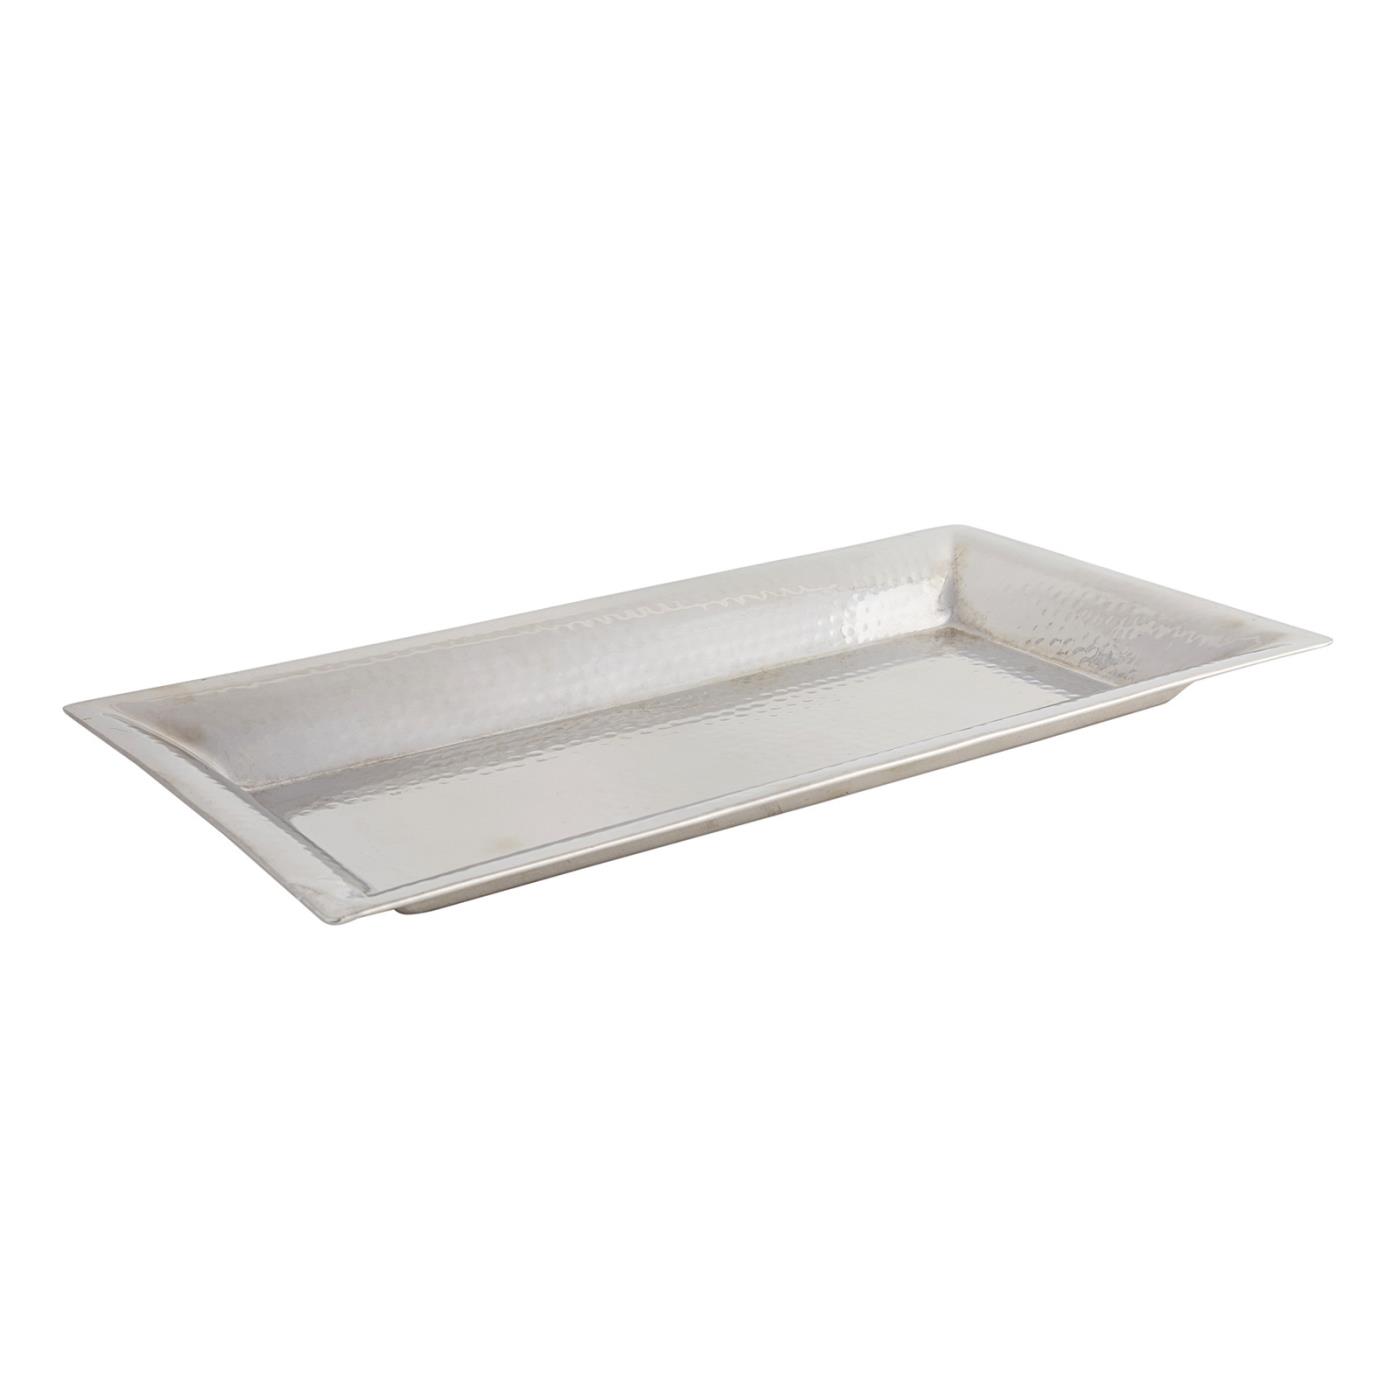 Hammered Rectangle Tray - 18.5" x 9.5"